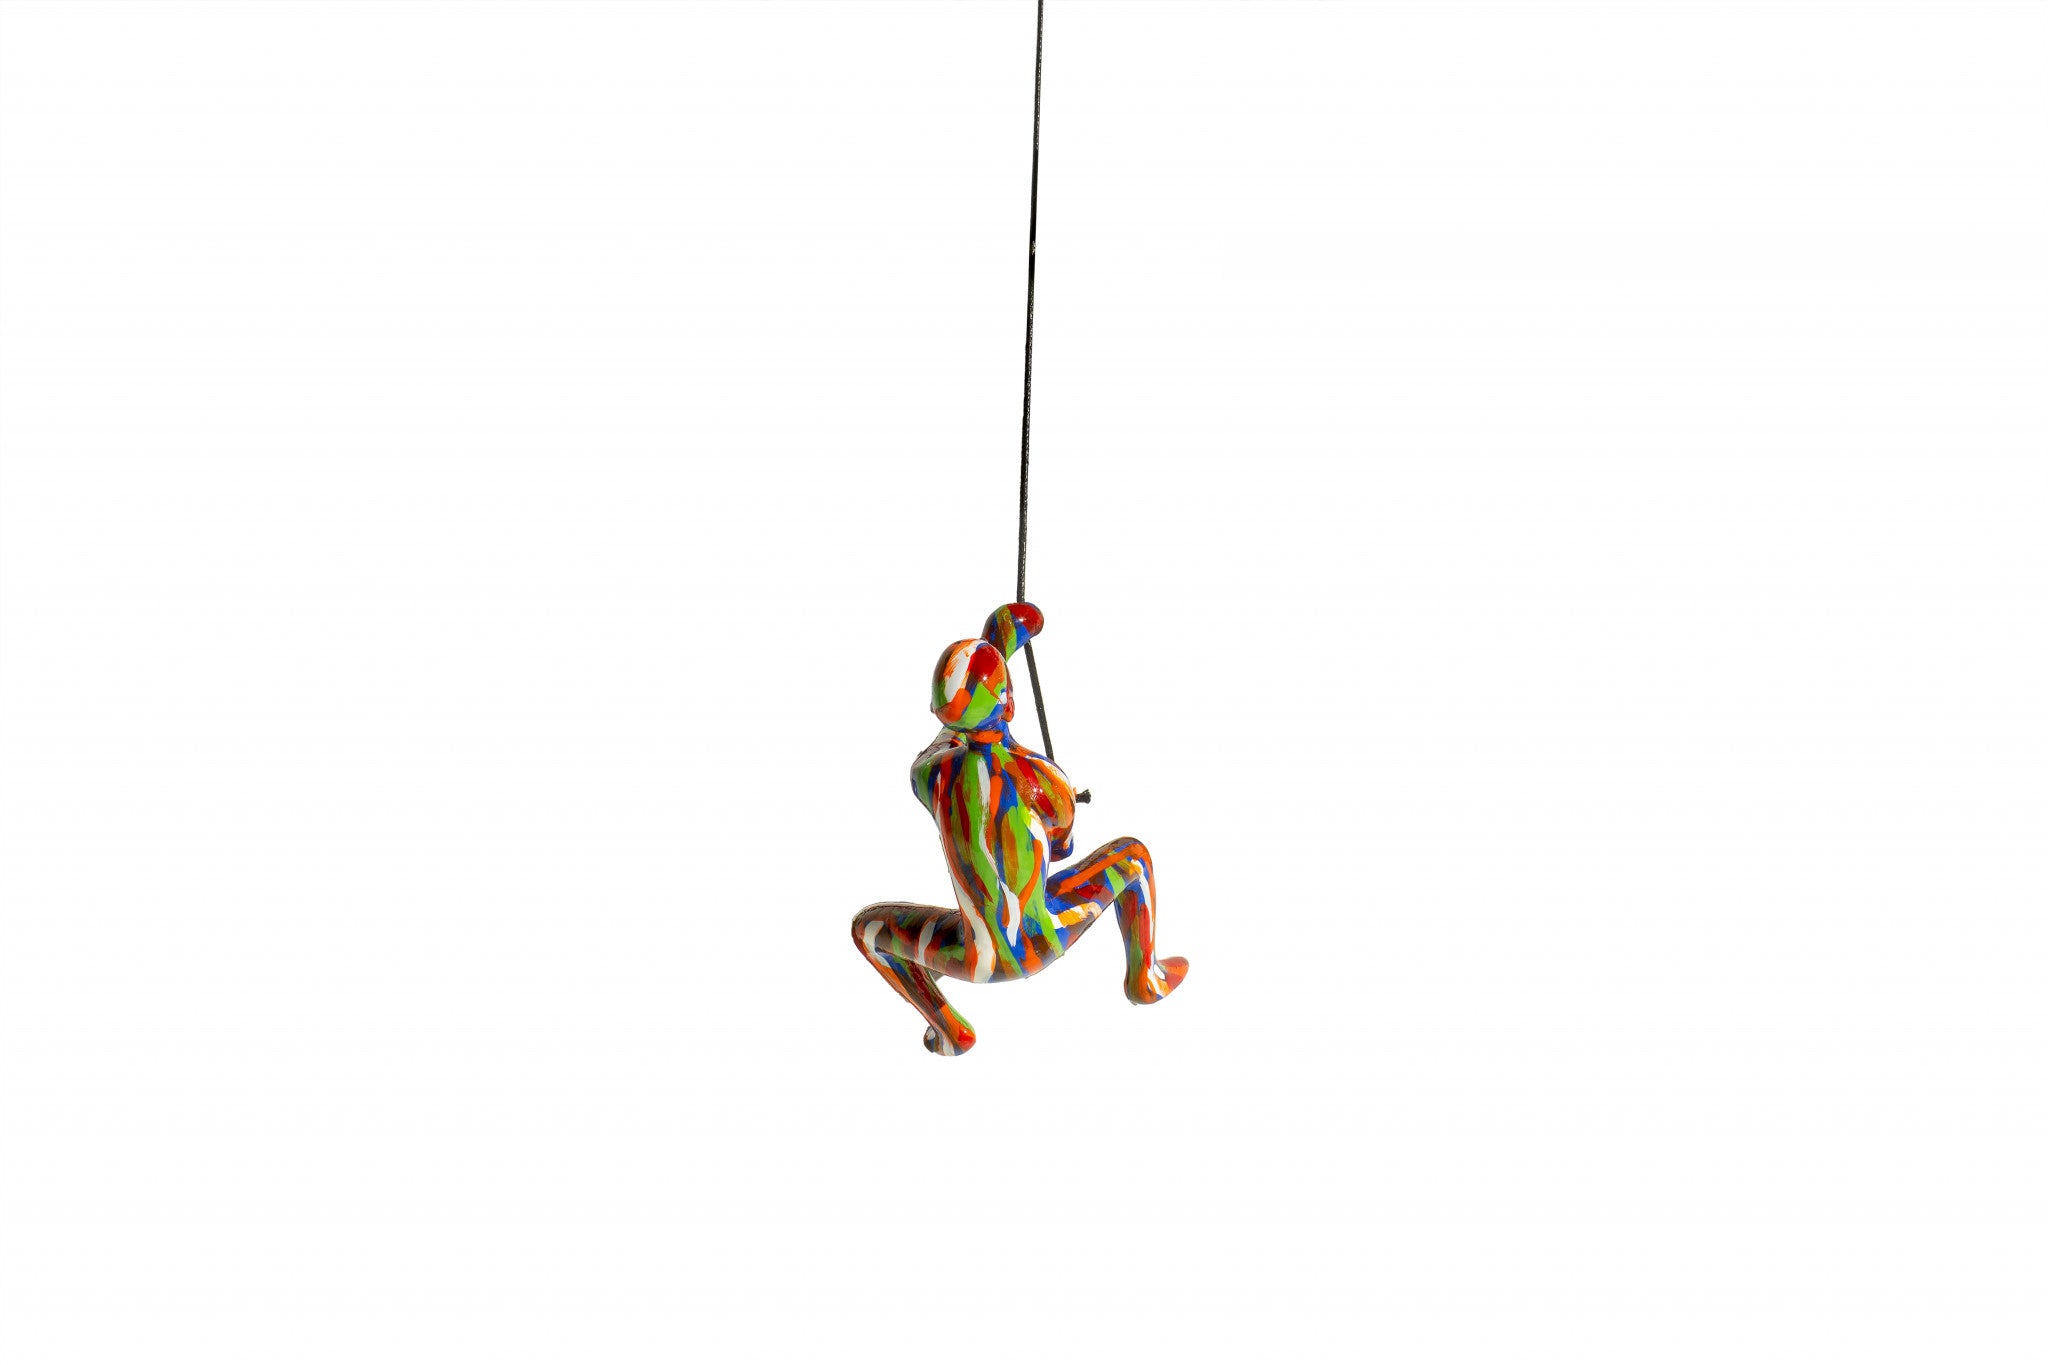 6" Rainbow Multi Unique Climbing Man With Rope Wall Art